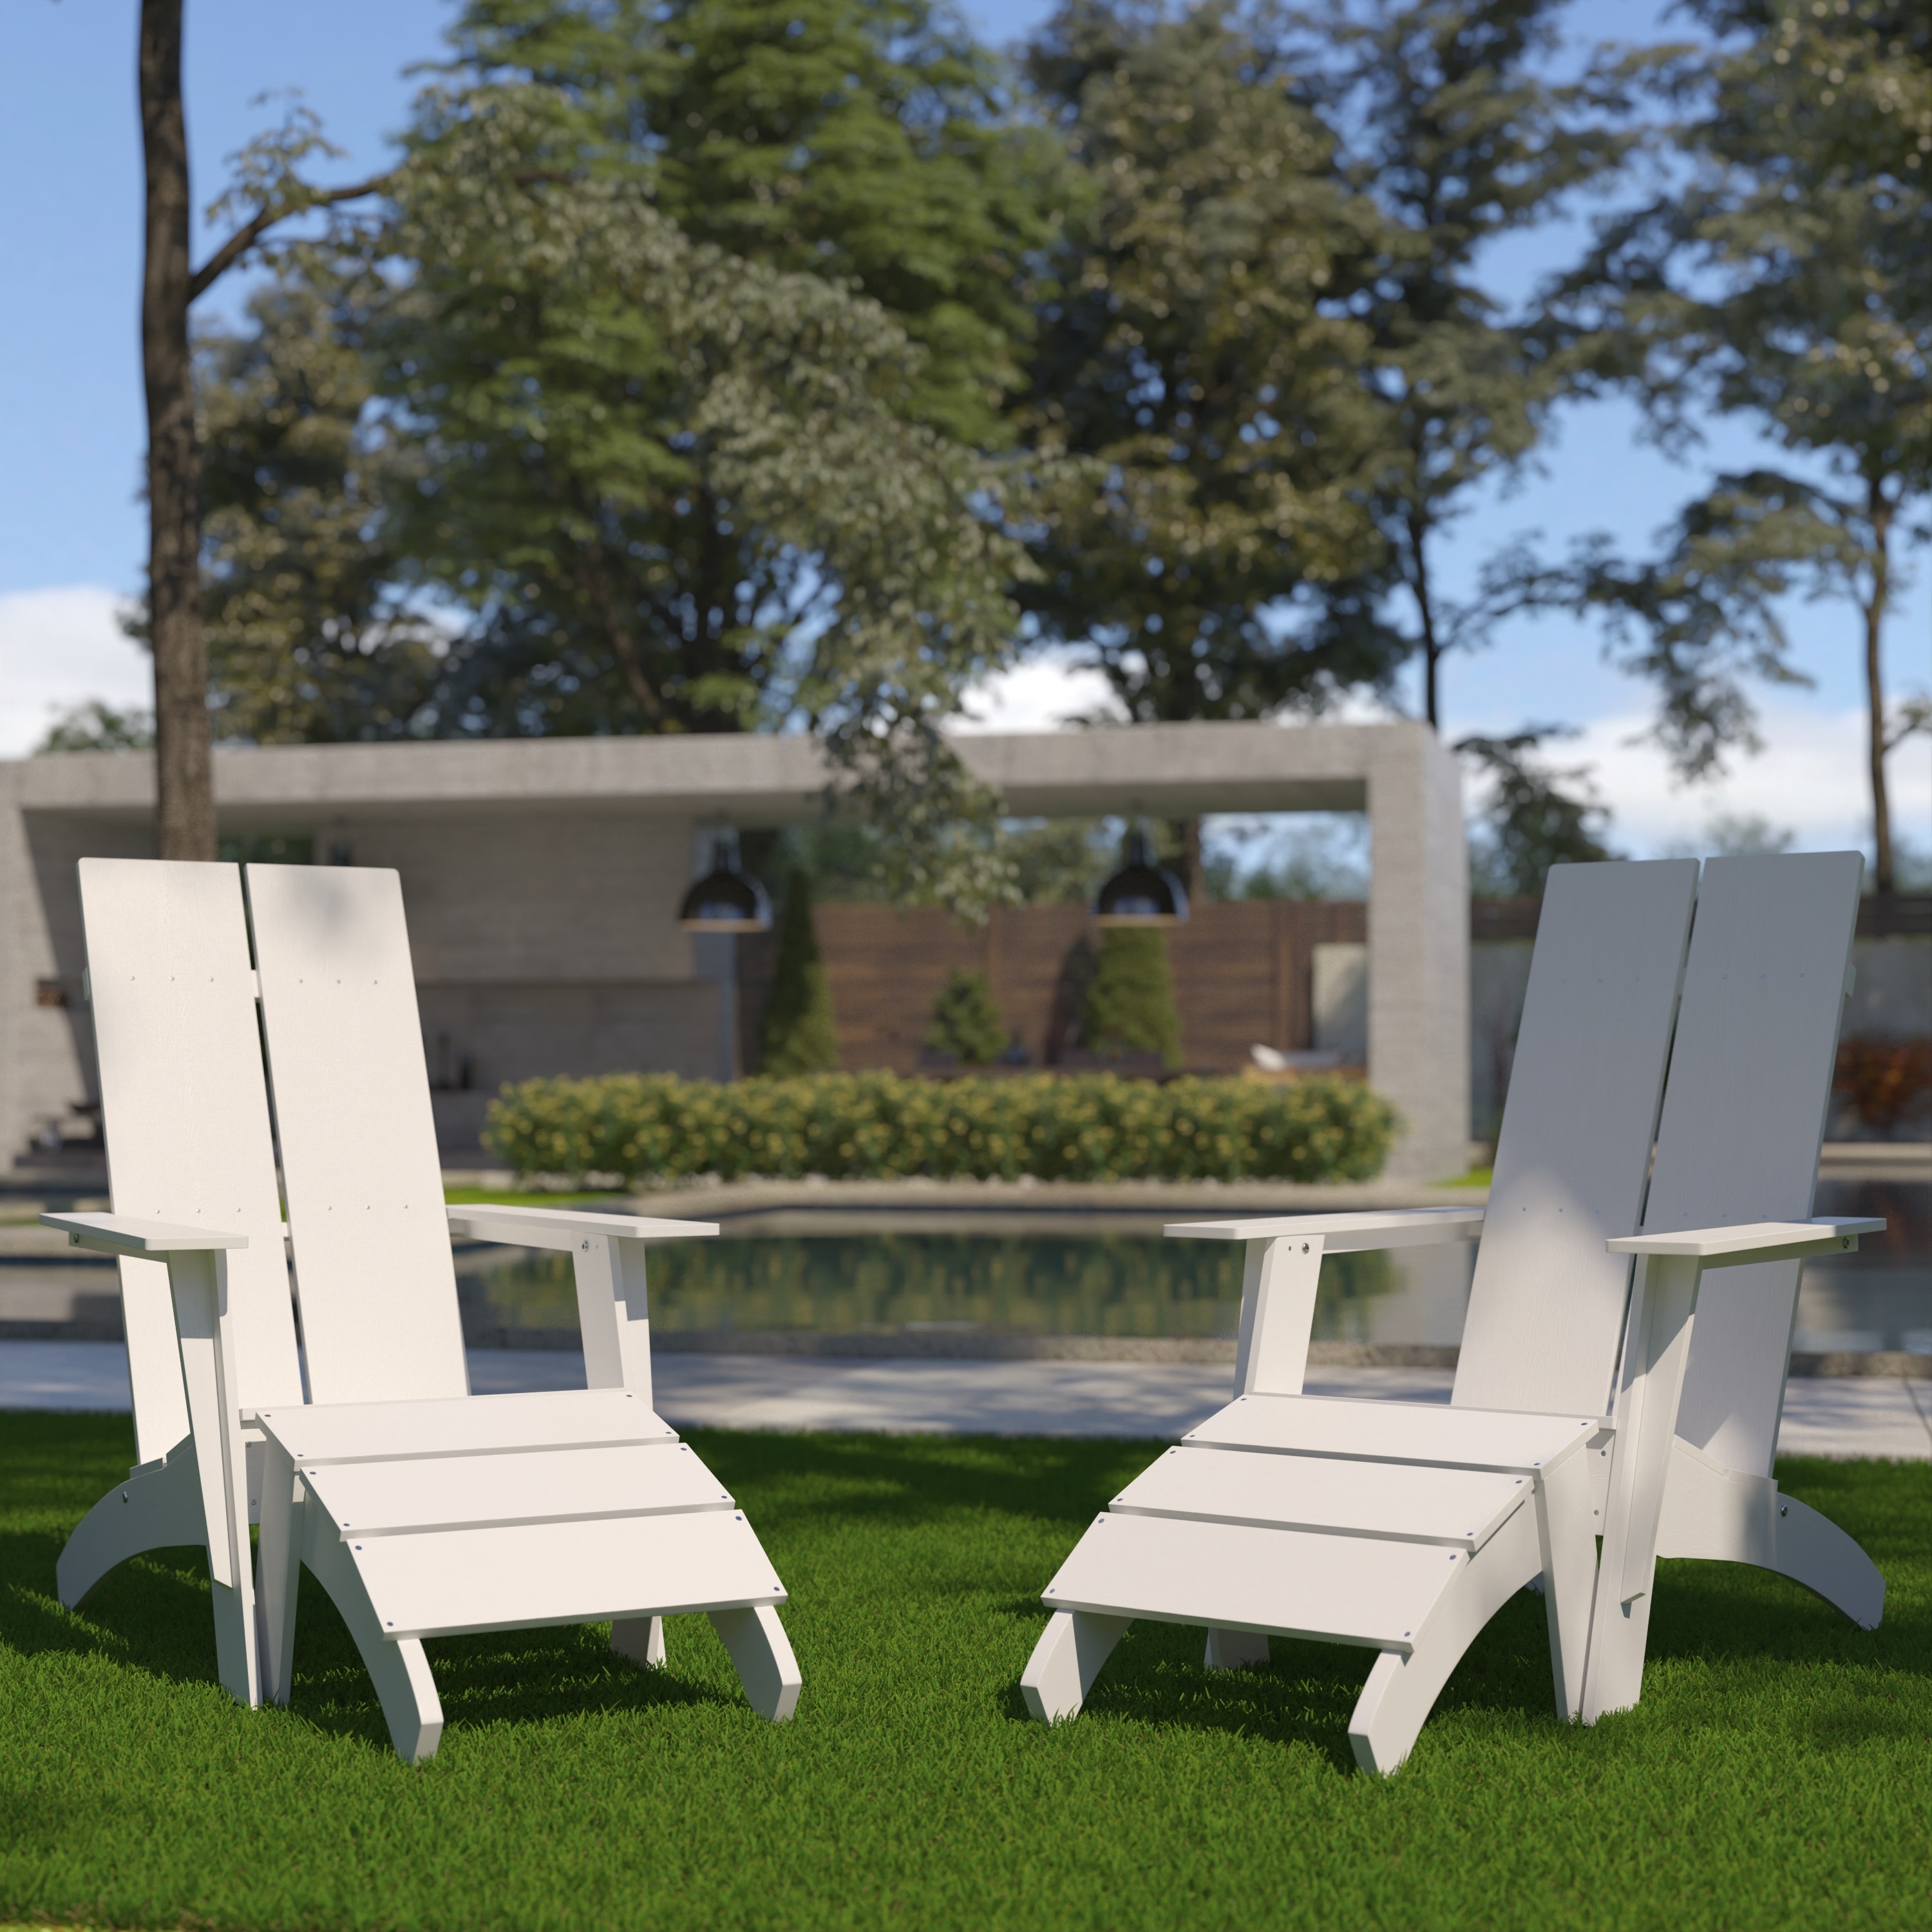 Flash Furniture Set of 2 Indoor/Outdoor 2-Slat Adirondack Style Chairs & Footrests in Gray Navy - image 2 of 5